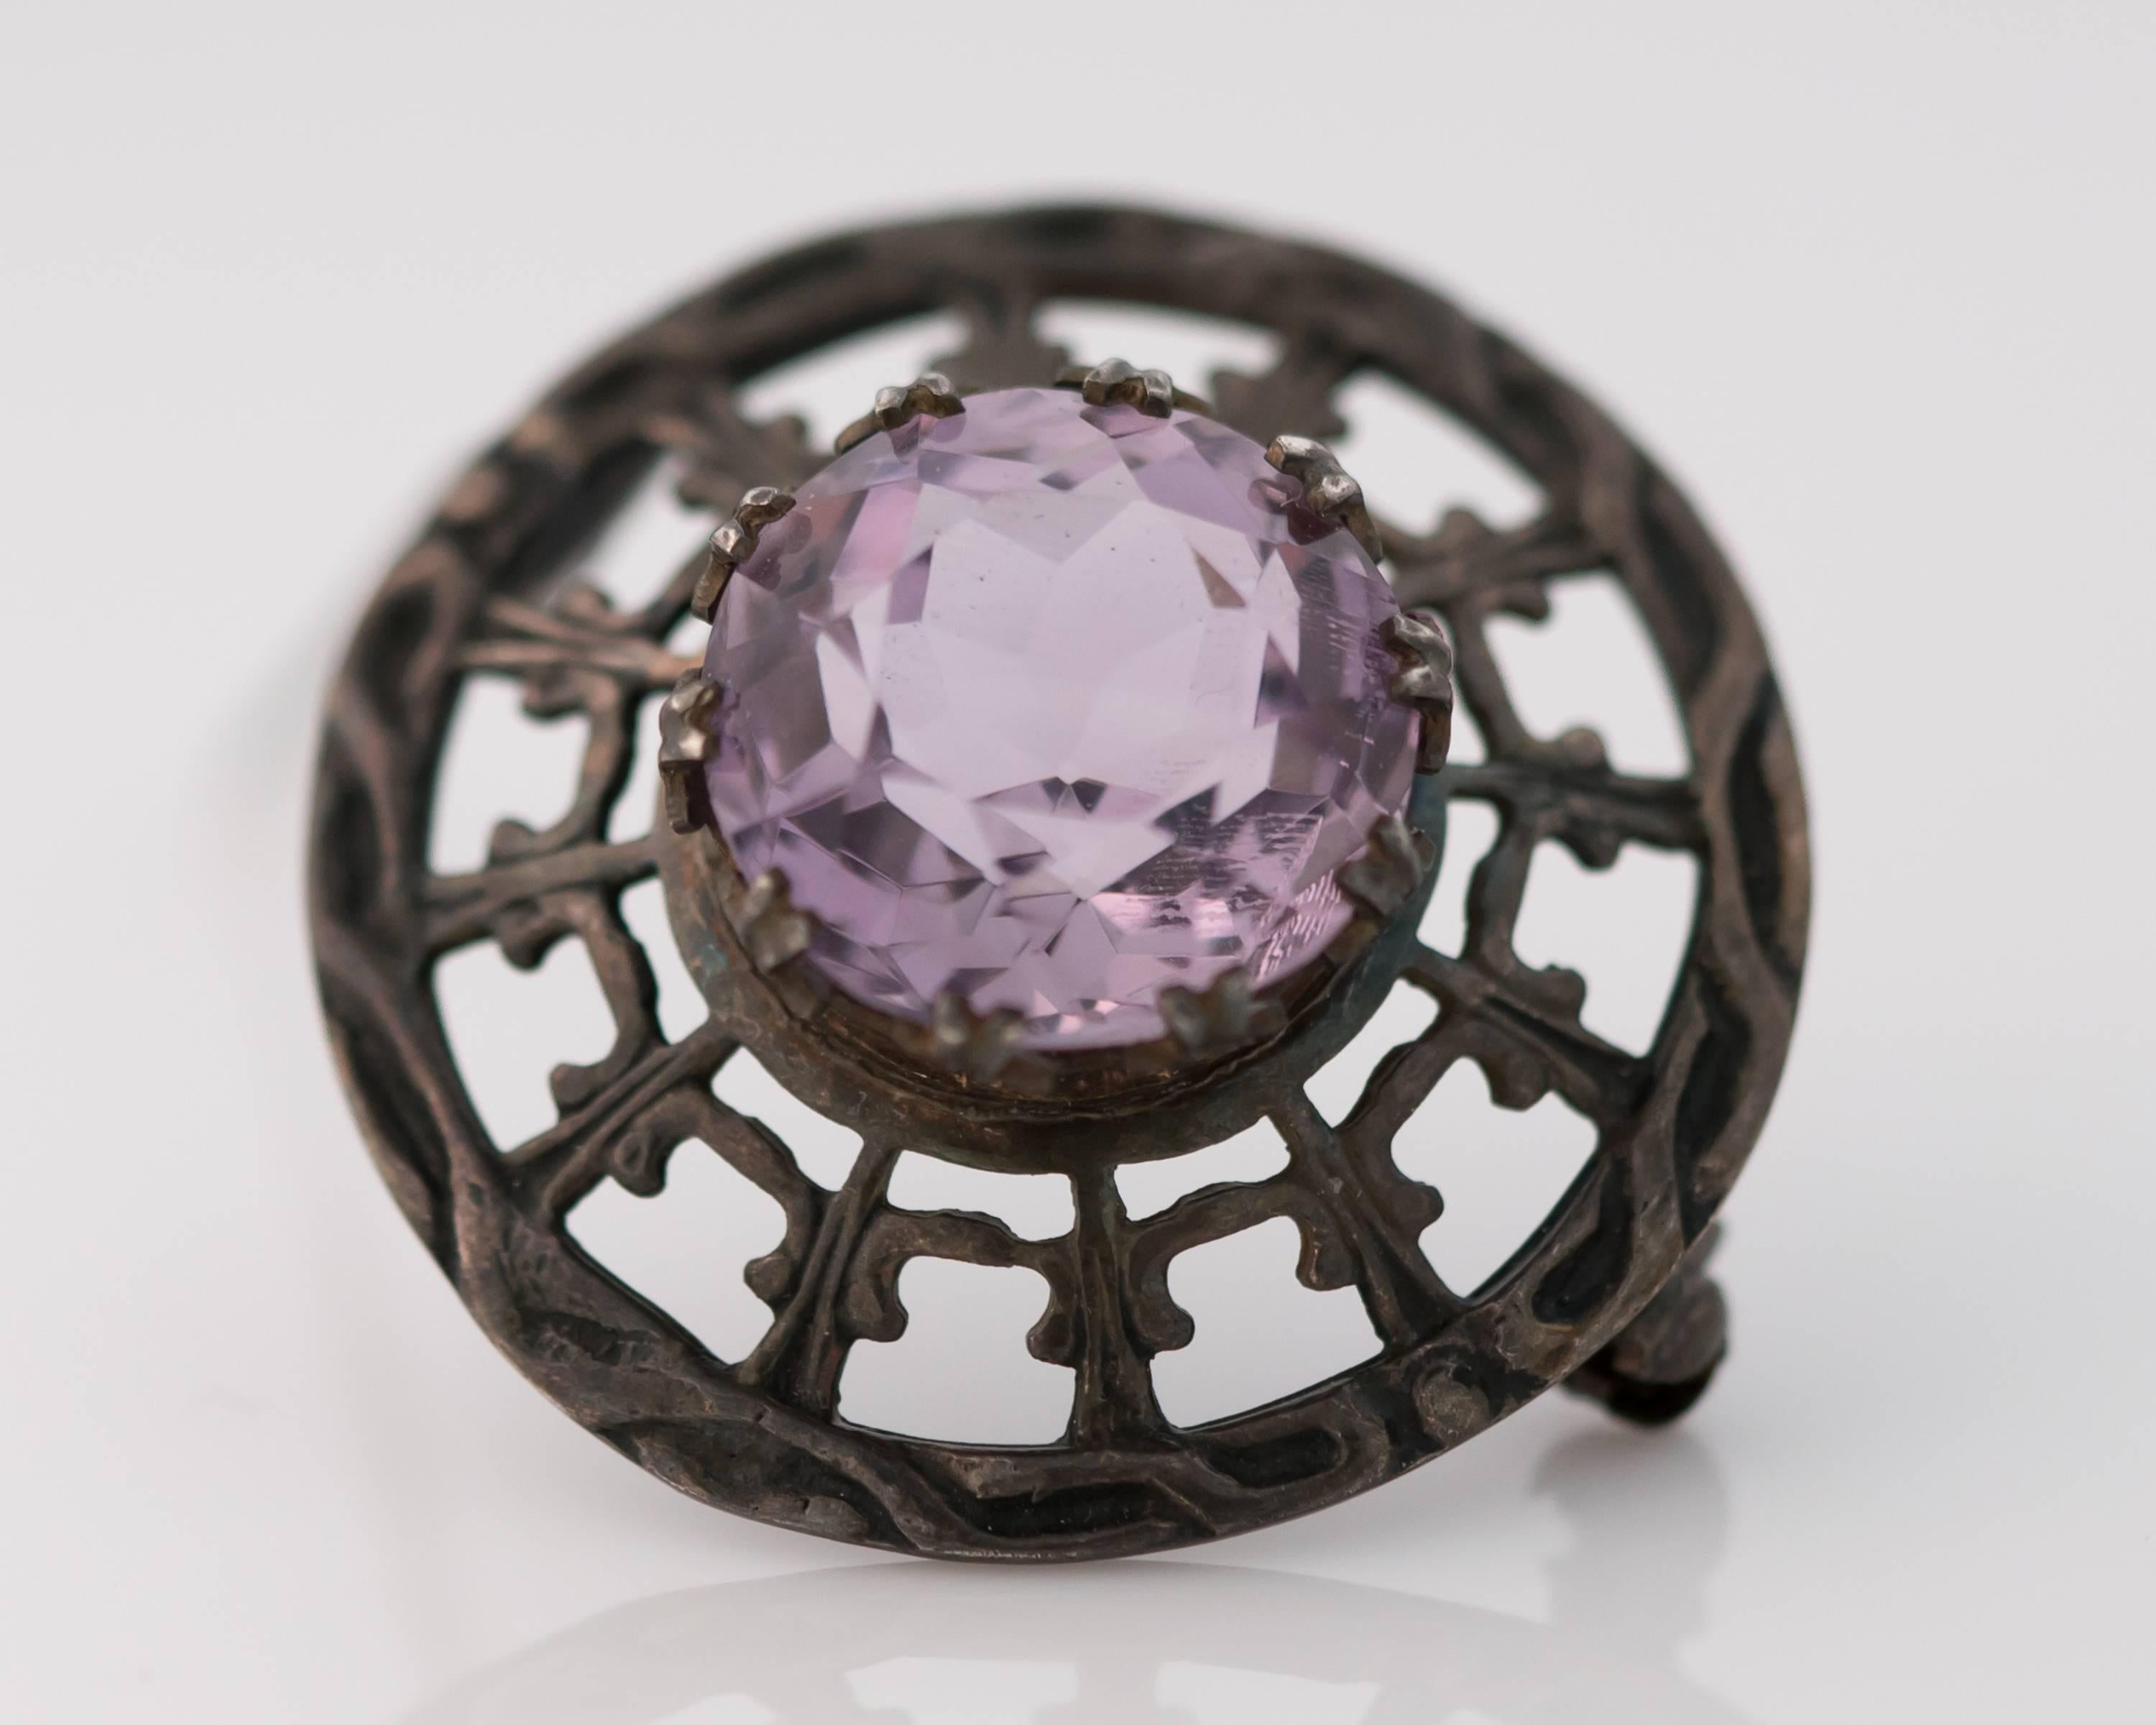 This 1910s Edwardian Era Brooch boasts a 10 Carat Old Miner Cut Amethyst set in Sterling Silver. This stunning 15 millimeter Amethyst is set with 10 talon double prongs for extra security. The classically patterned sterling silver has achieved a